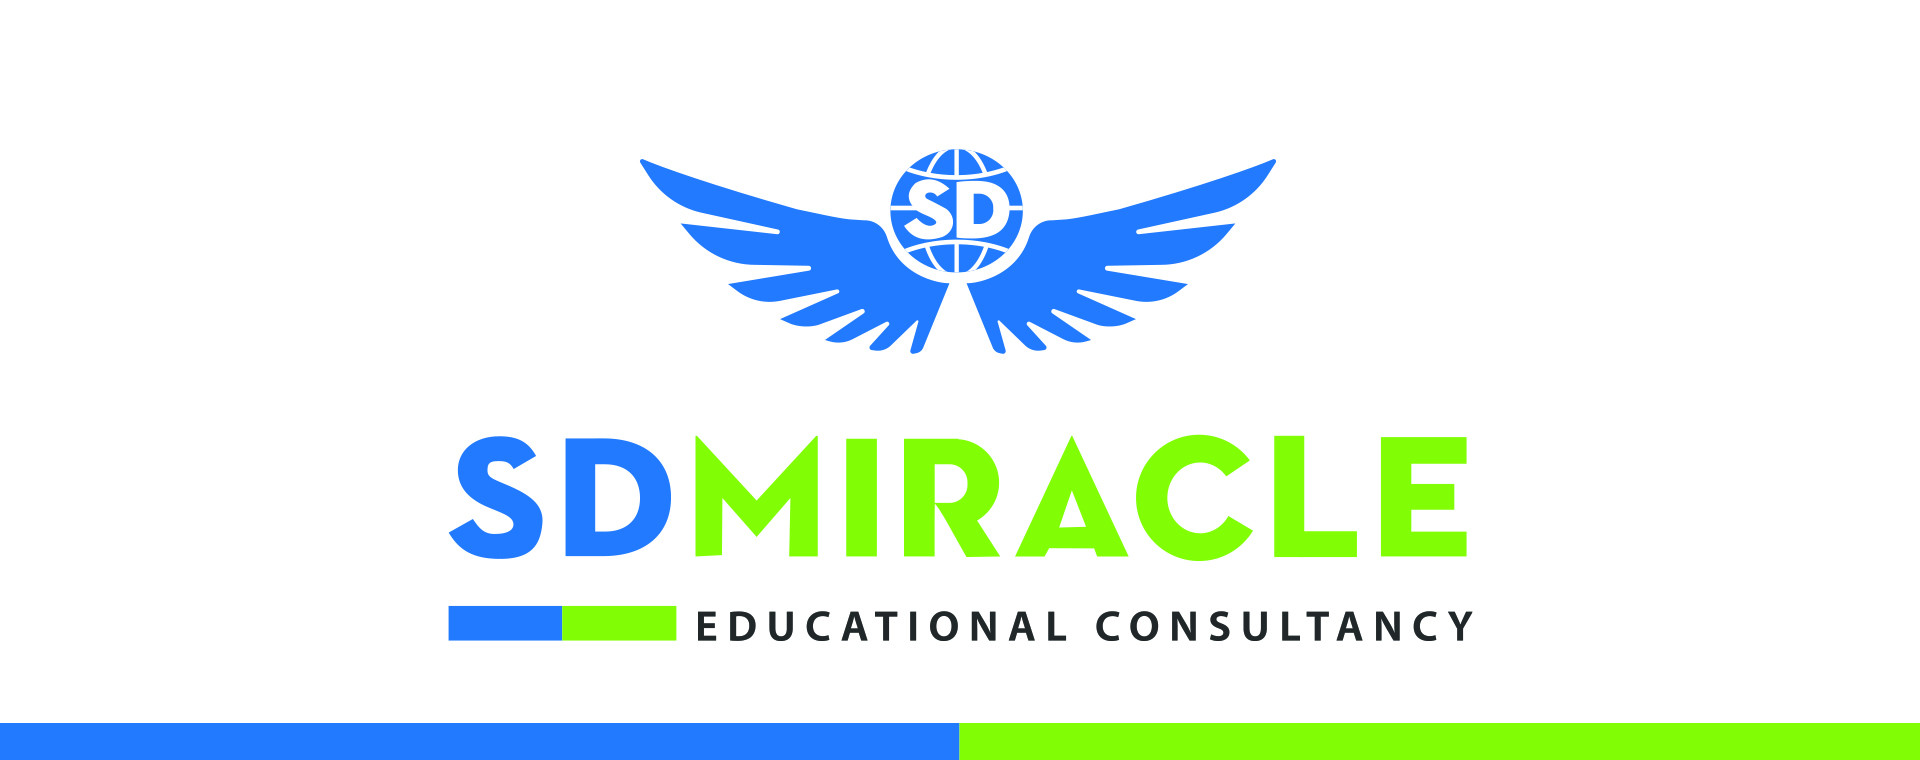 Best education consultancy in Nepal for abroad study - TMA Education  Consultancy